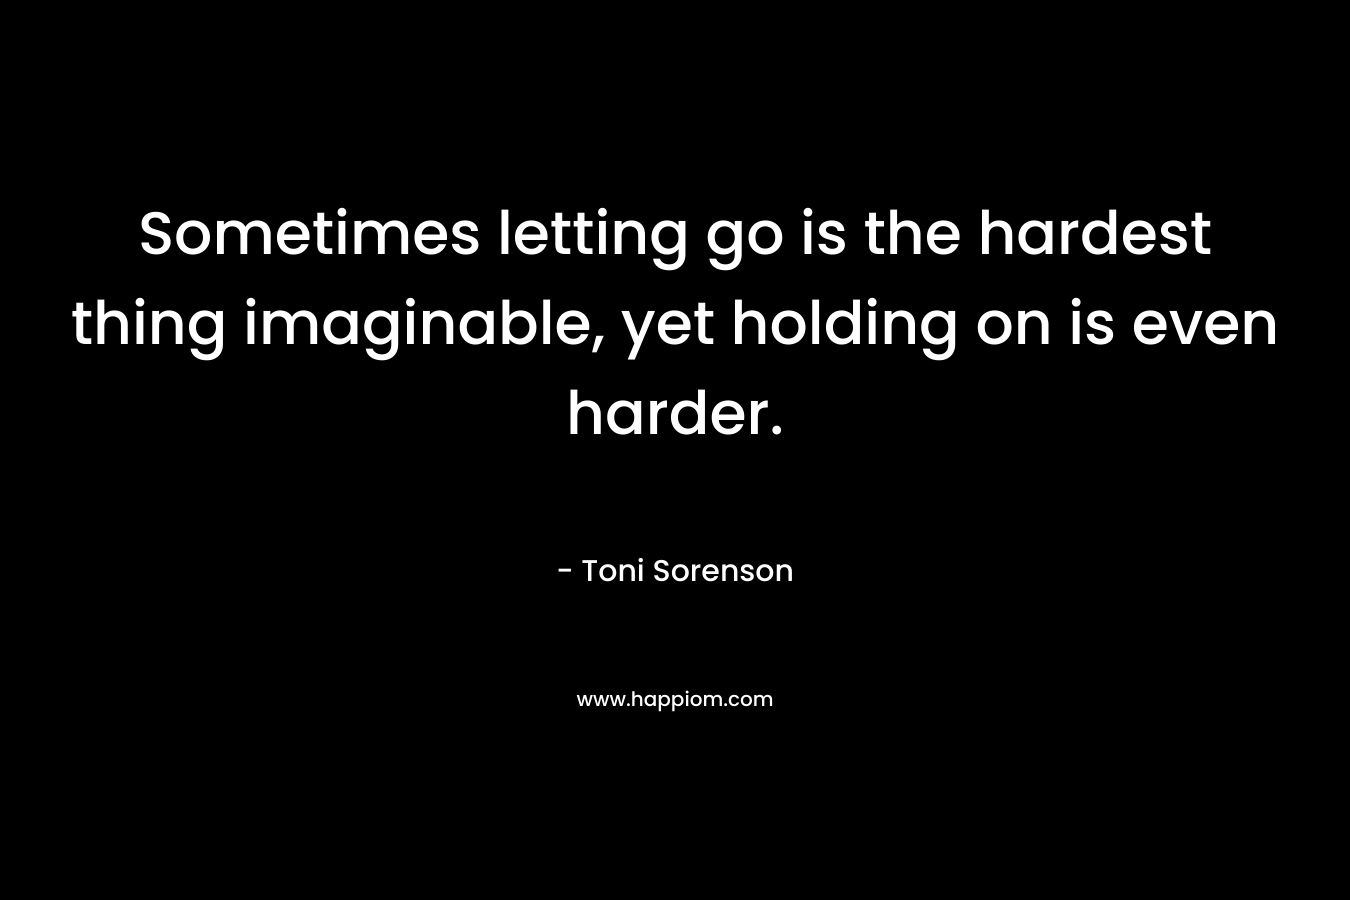 Sometimes letting go is the hardest thing imaginable, yet holding on is even harder. – Toni Sorenson